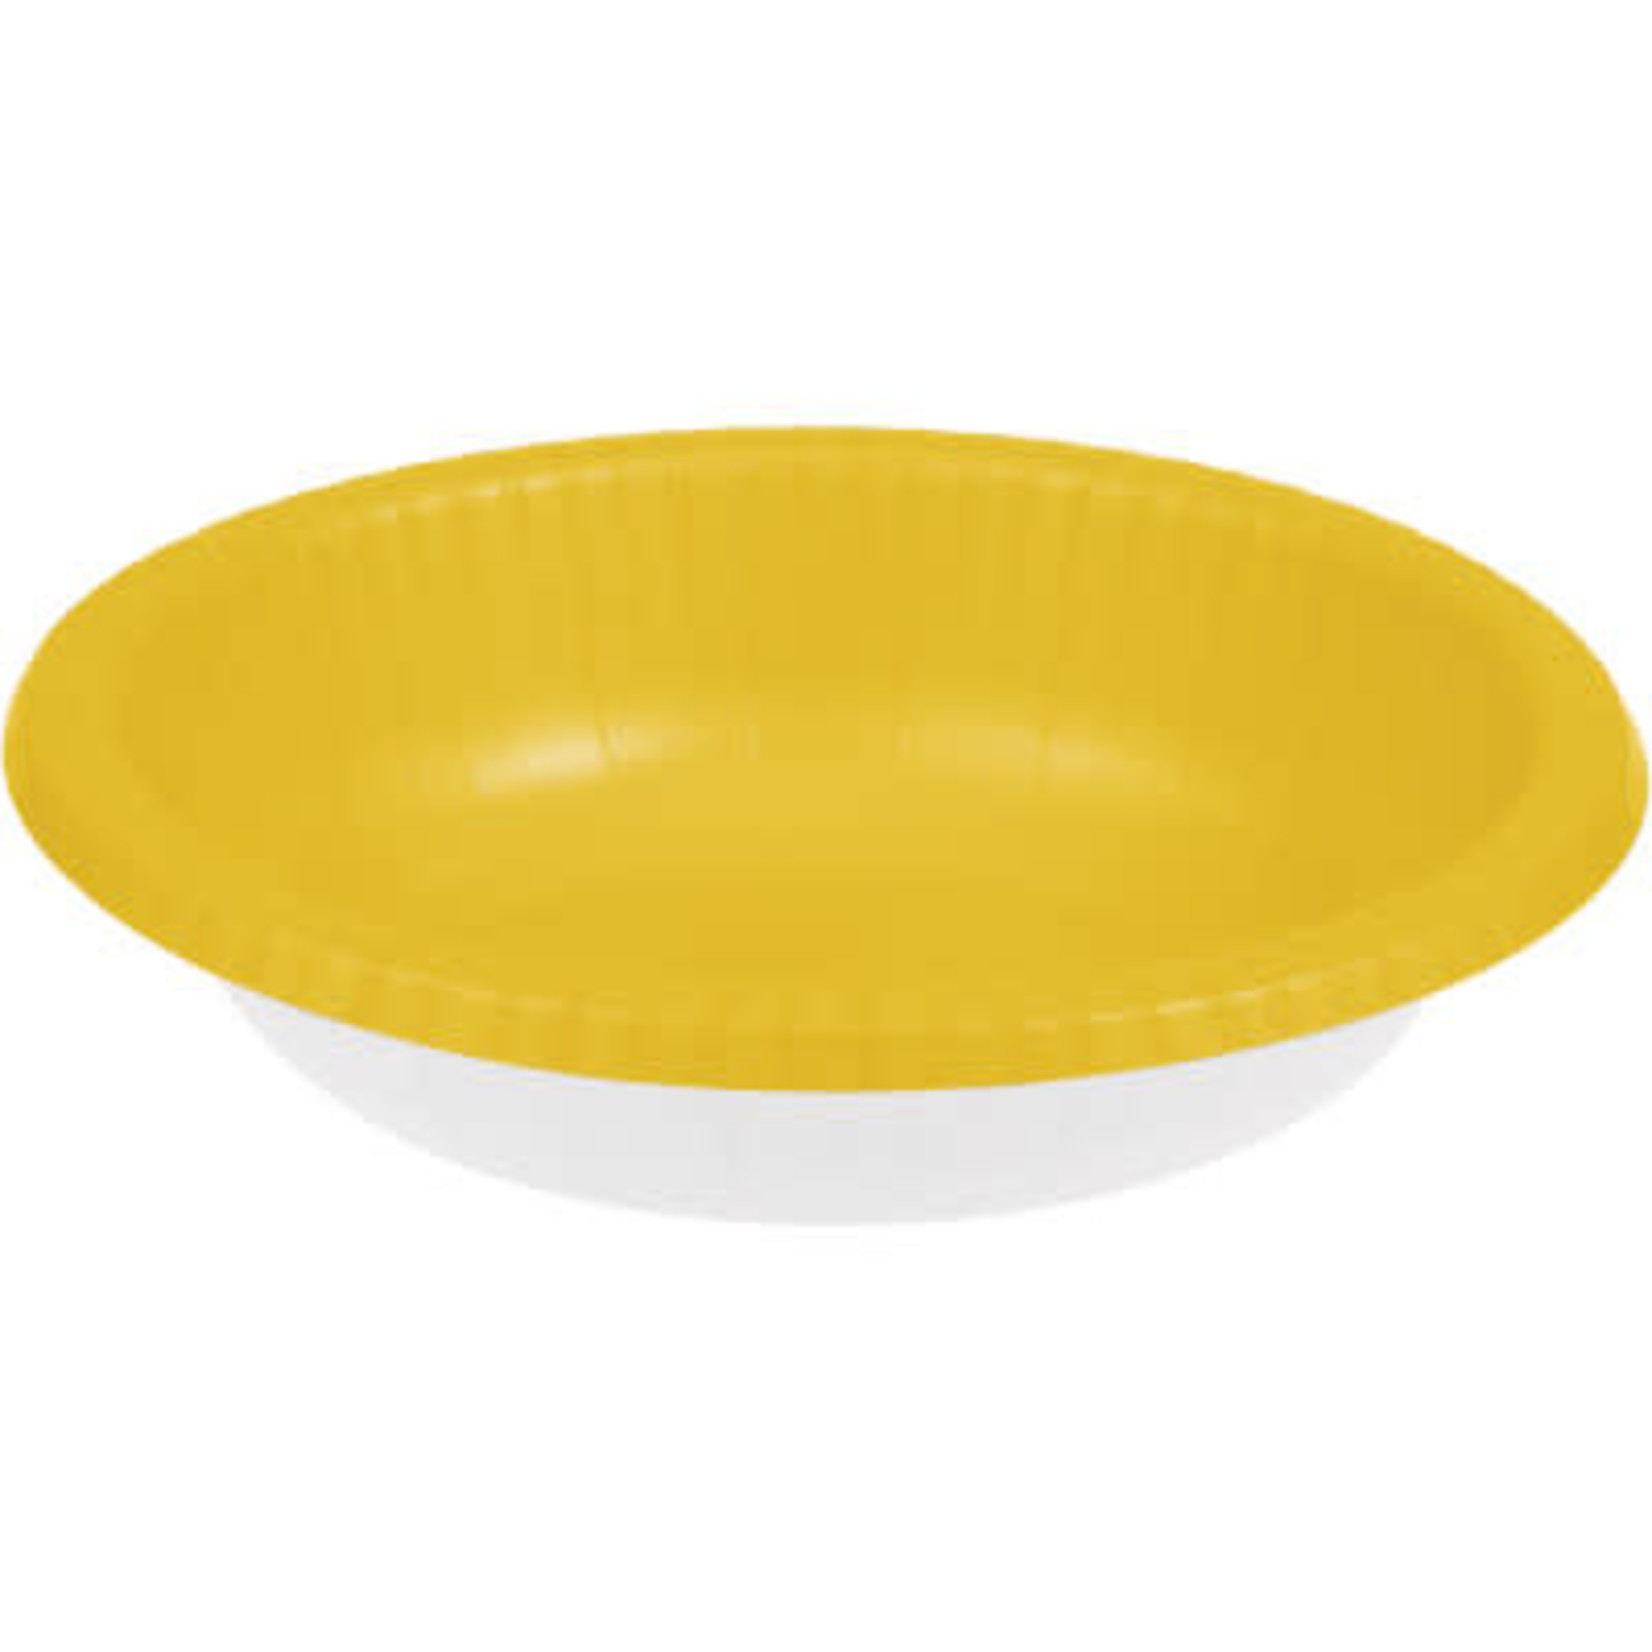 Touch of Color 20oz. School Bus Yellow Paper Bowls - 20ct.